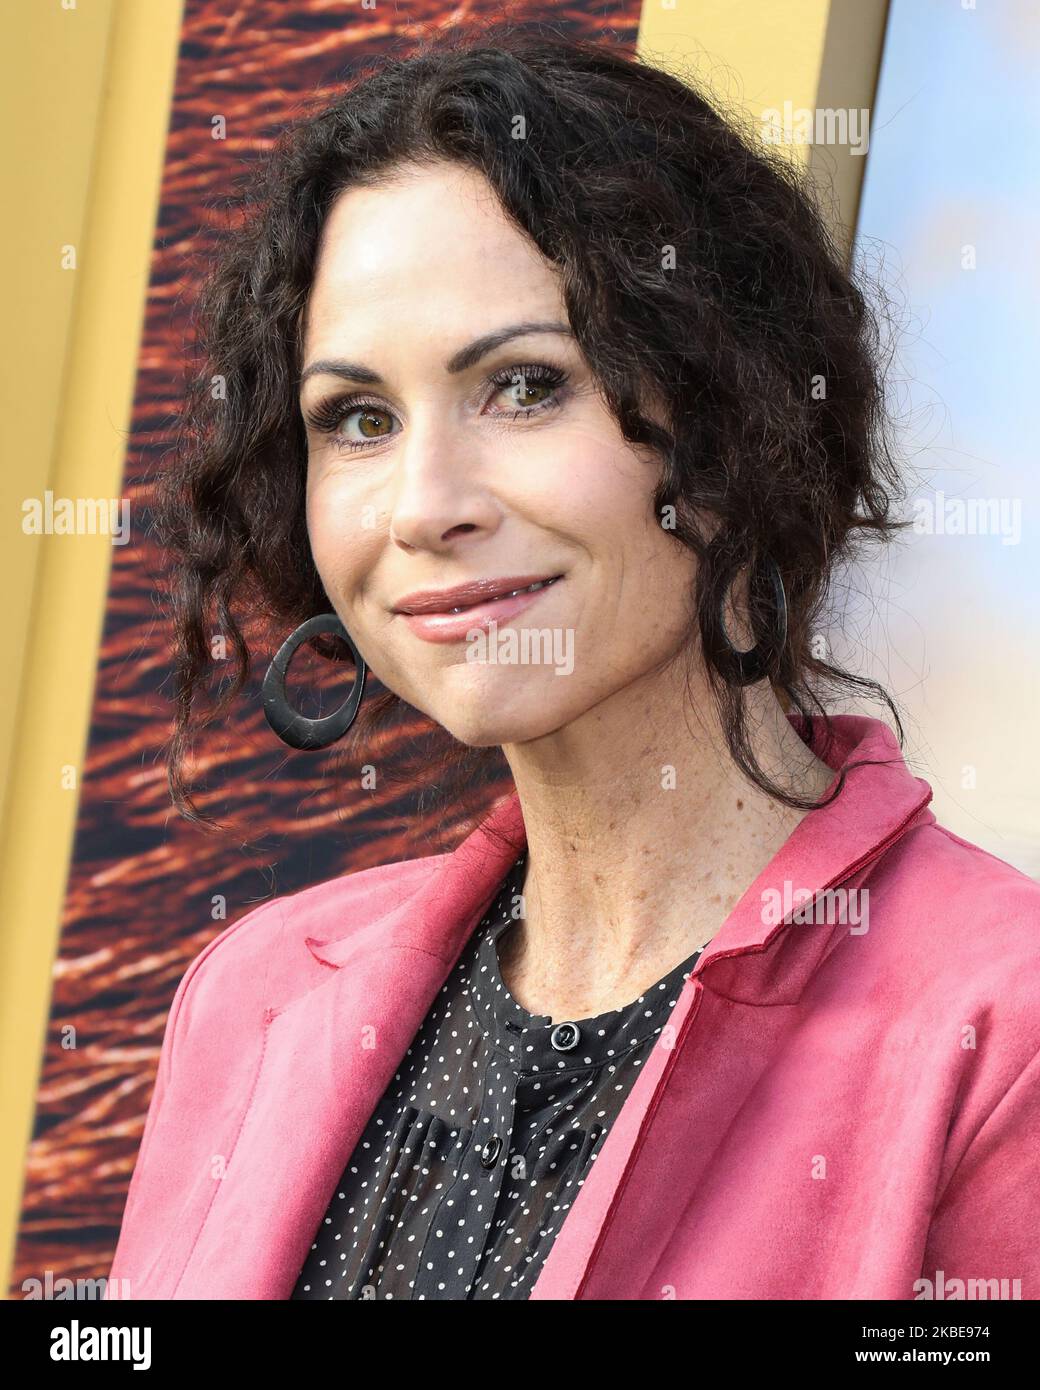 WESTWOOD, LOS ANGELES, CALIFORNIA, USA - JANUARY 11: Minnie Driver arrives at the Los Angeles Premiere Of Universal Pictures' 'Dolittle' held at the Regency Village Theatre on January 11, 2020 in Westwood, Los Angeles, California, United States. (Photo by Xavier Collin/Image Press Agency/NurPhoto) Stock Photo